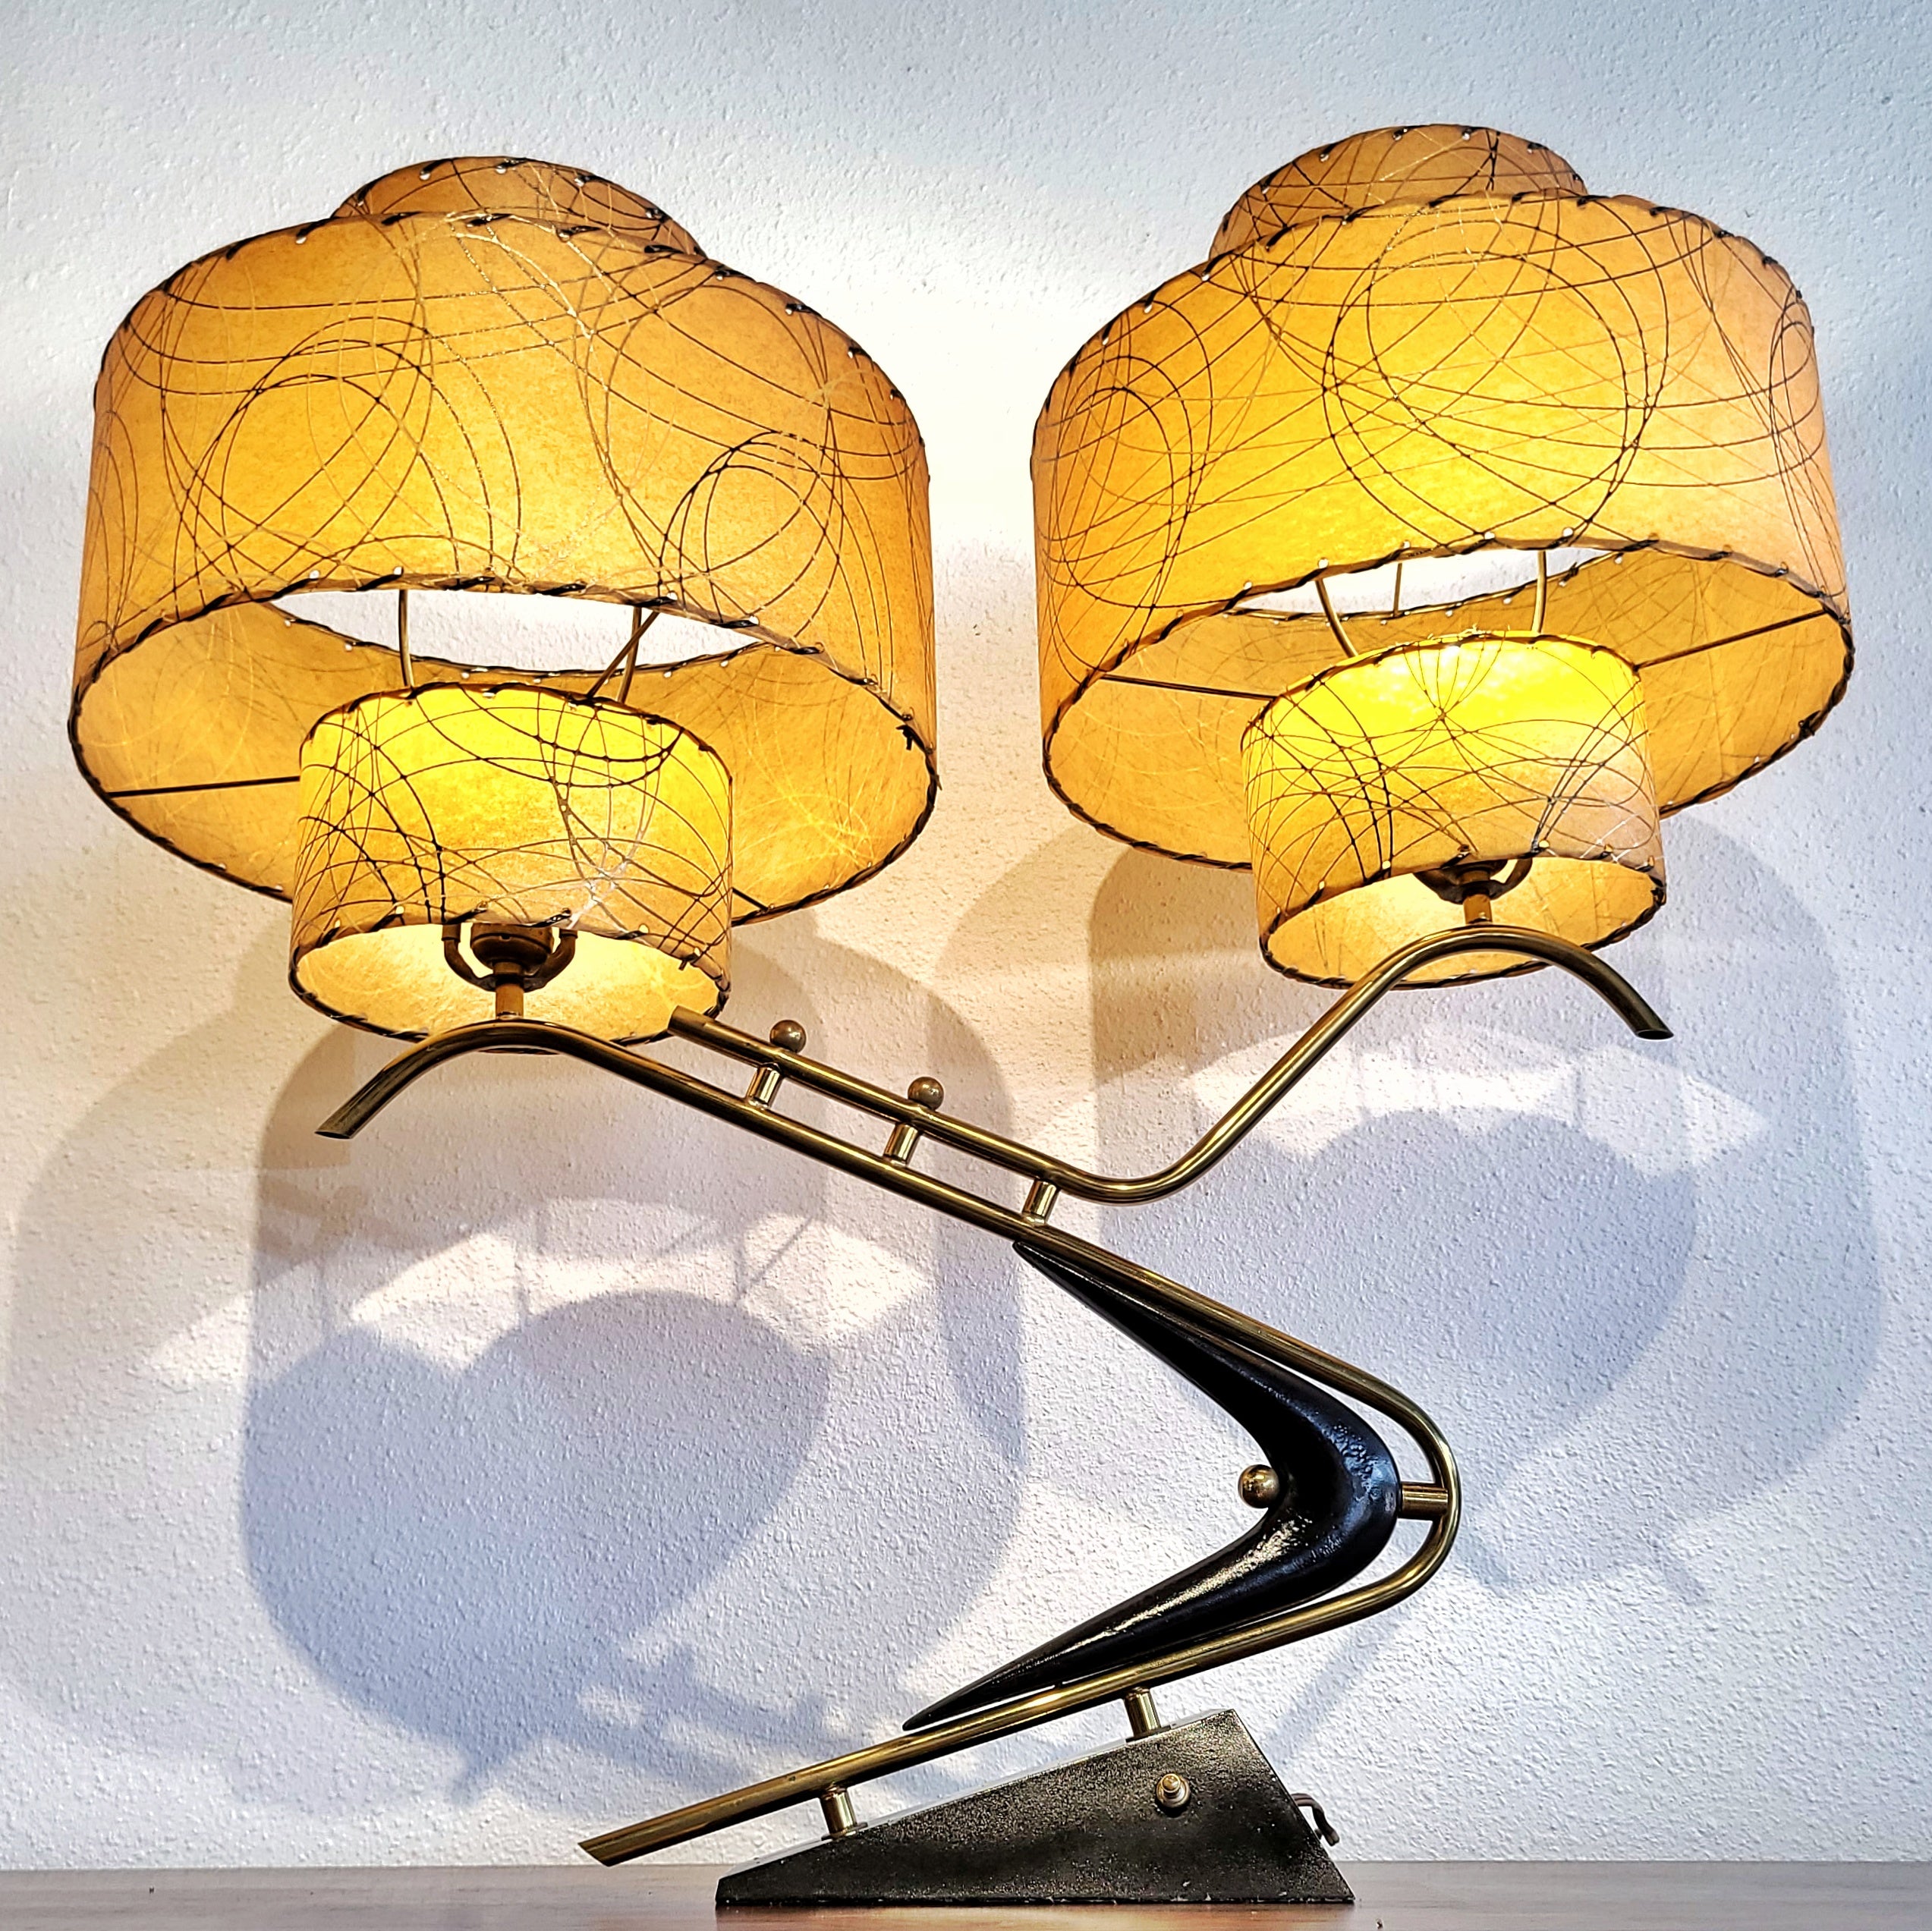 1950s ‘BOOMERANG’ TABLE LAMPS WITH TRIPLE-LEVEL FIBERGLASS SHADES (PAIR)